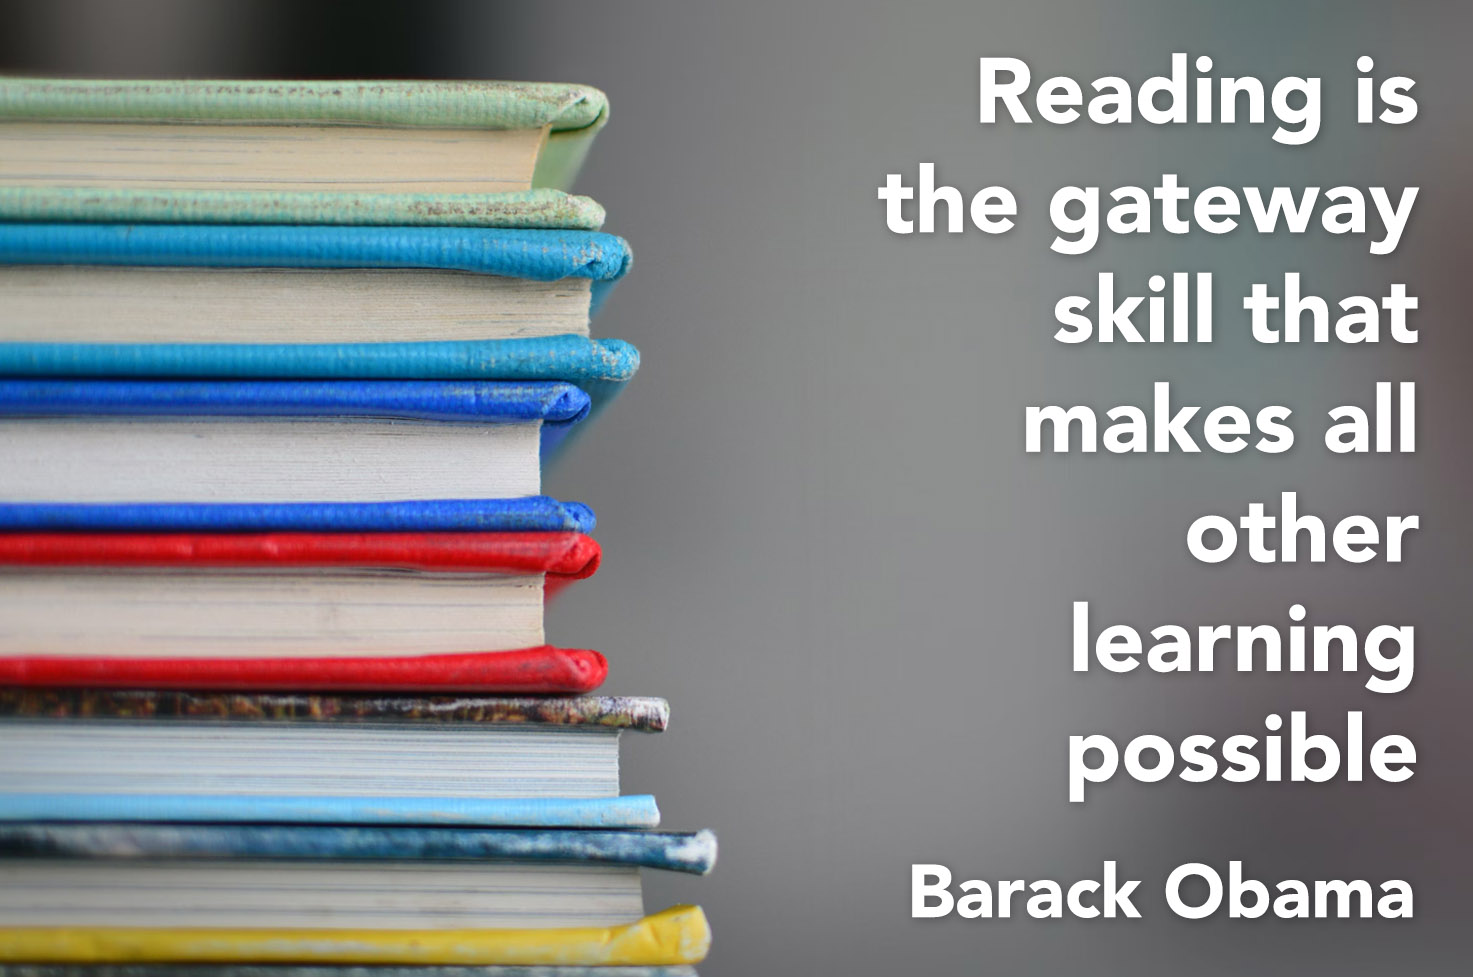 reading is the gateway that makes all other learning possible